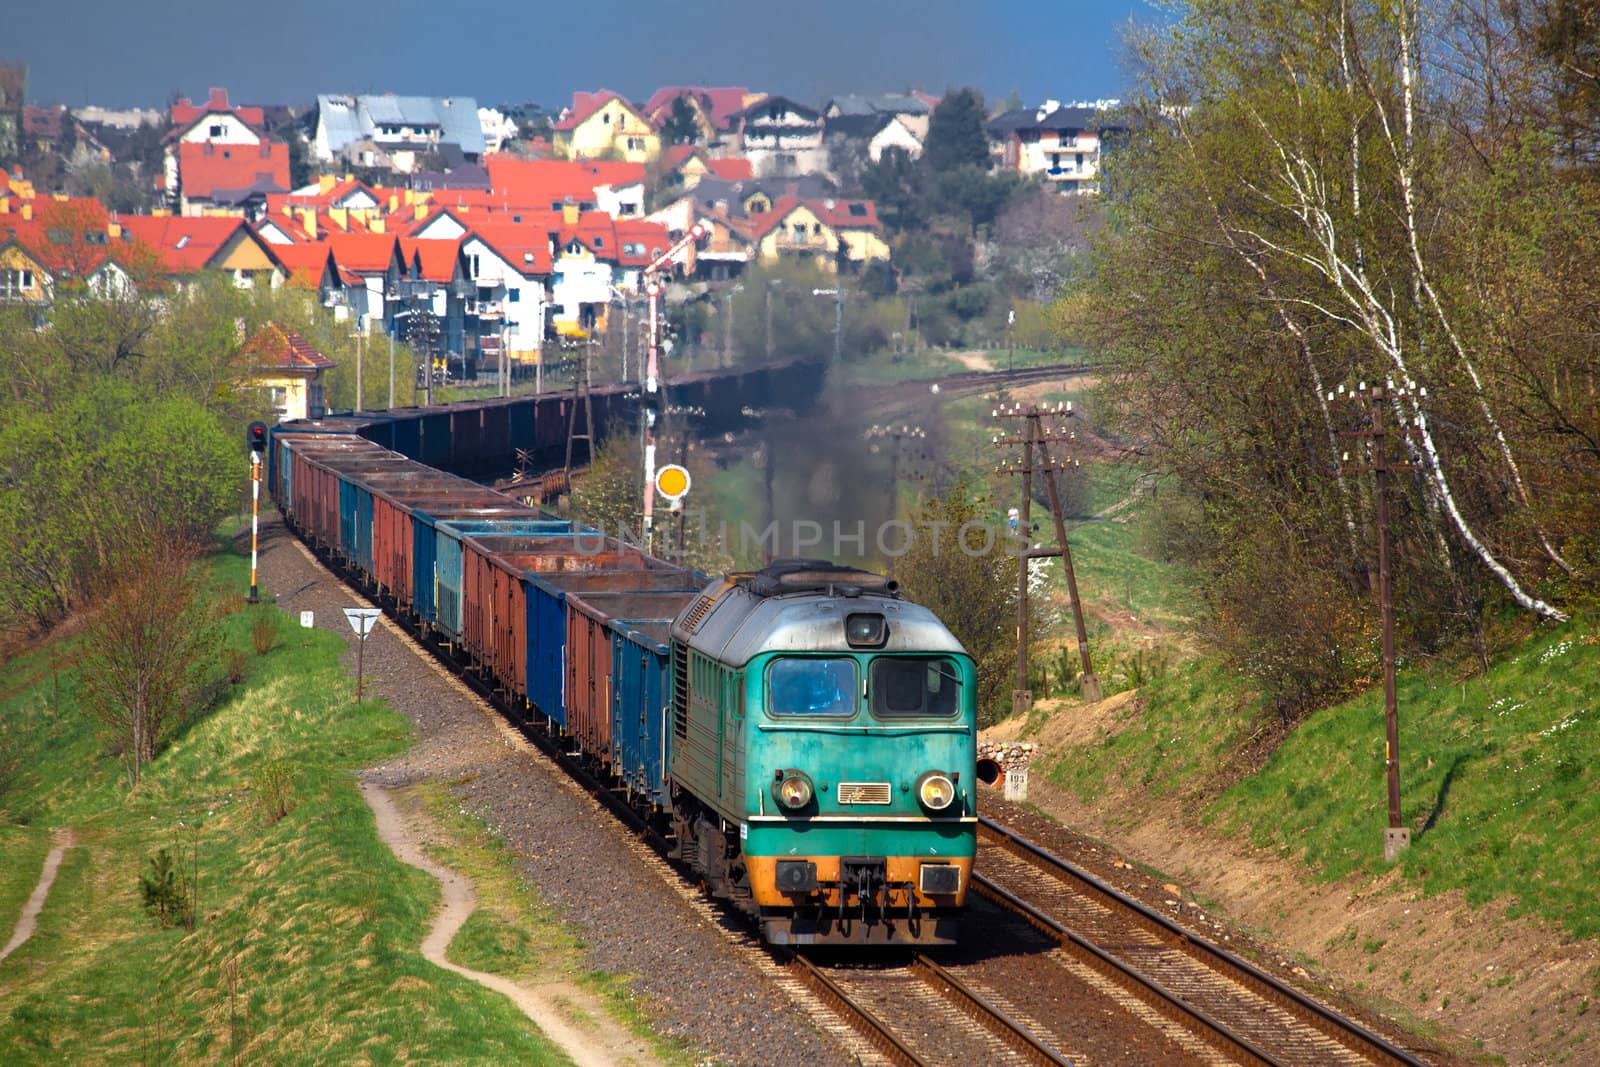 Freight train by remik44992